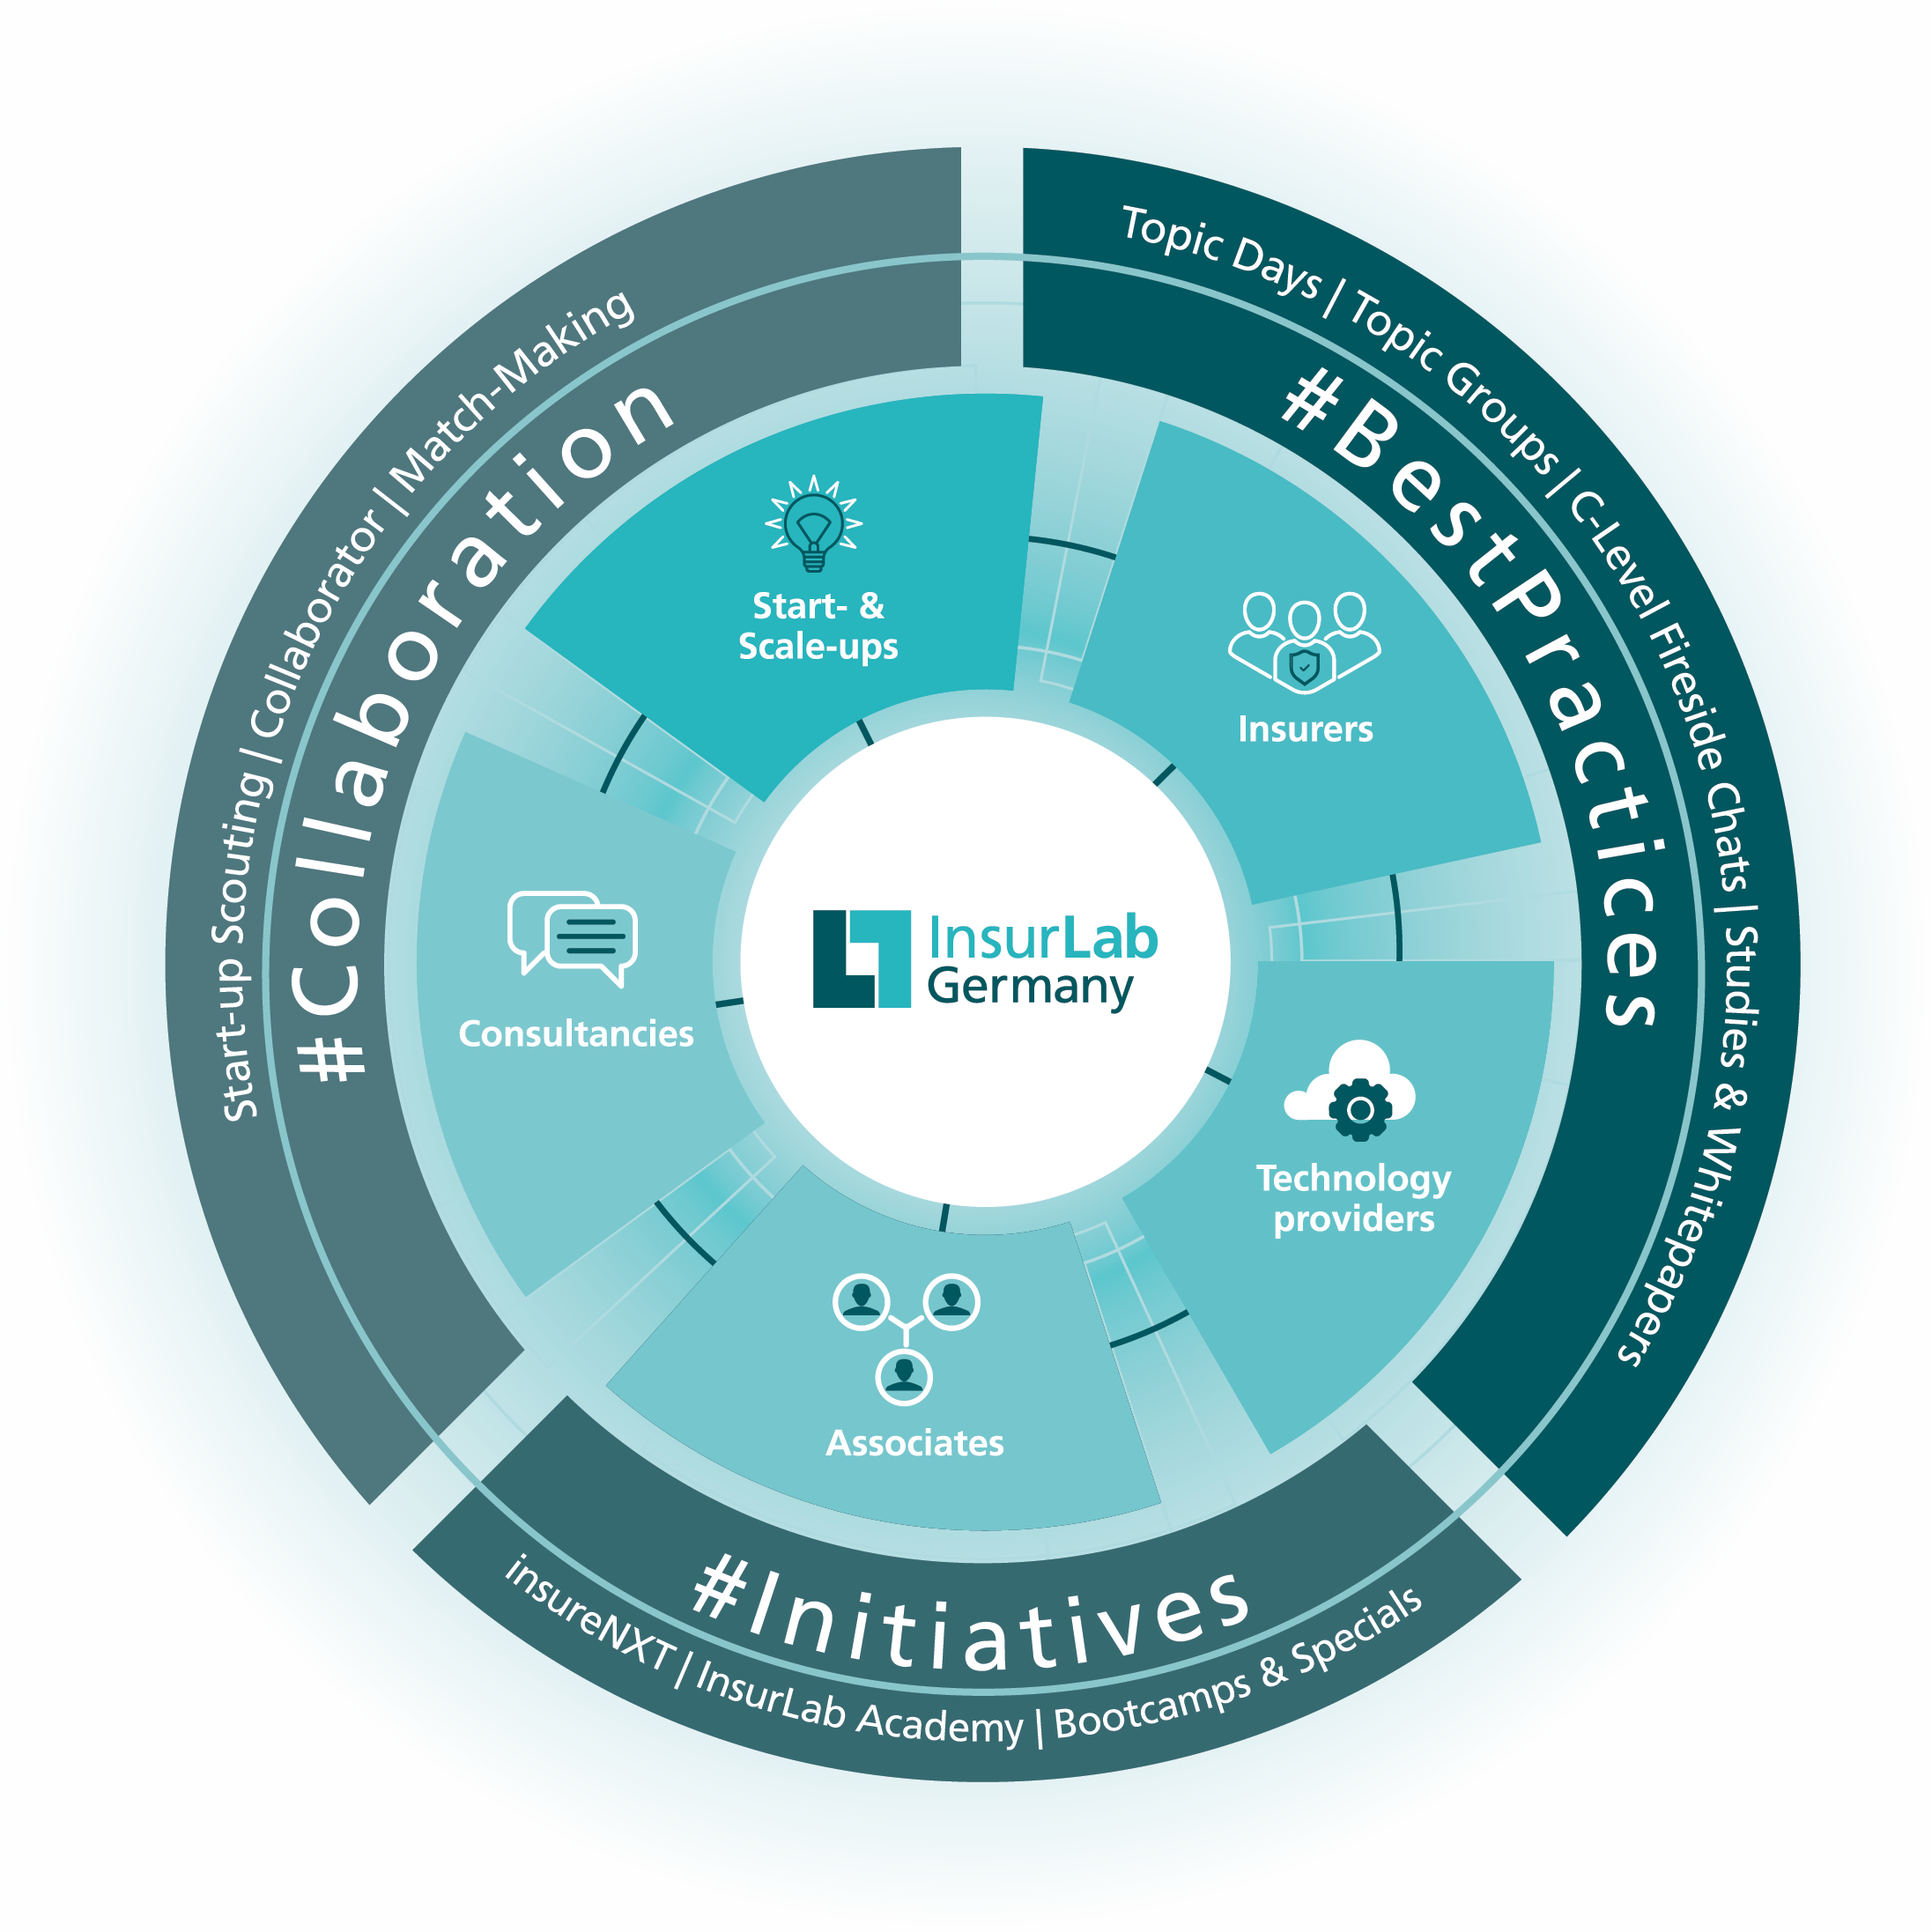 Find out here at a glance who InsurLab Germany is and what makes our industry initiative so special